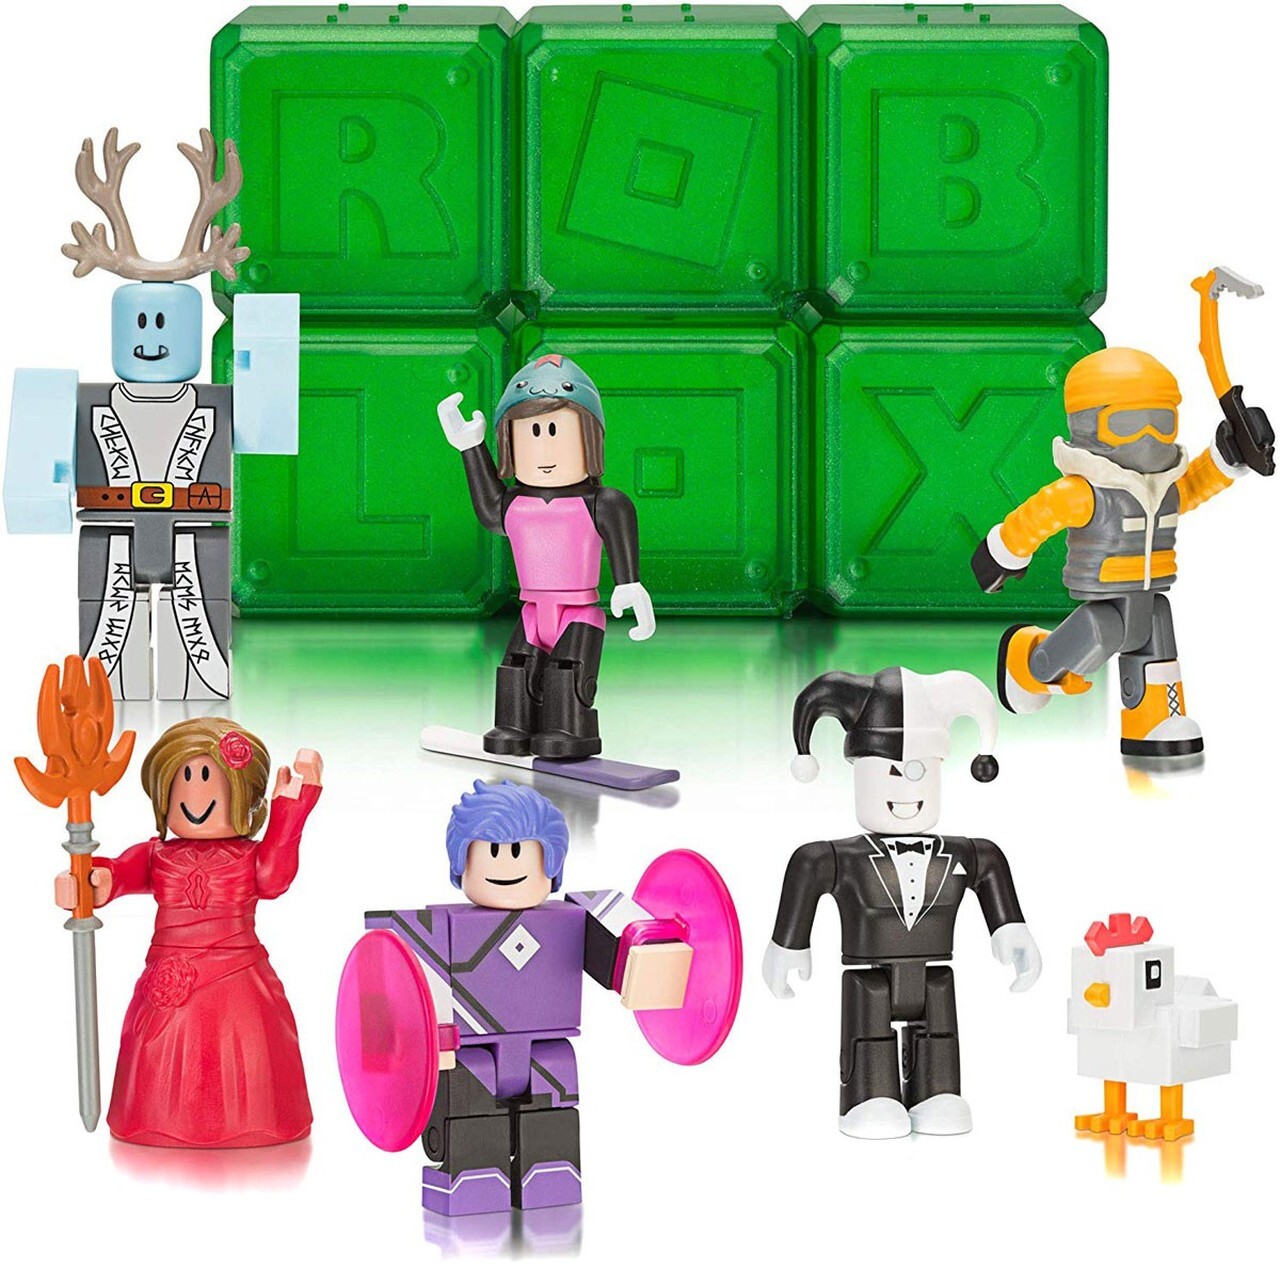 Roblox Toys Series 2 - details about roblox mix match mad games adam includes one figure virtual code new